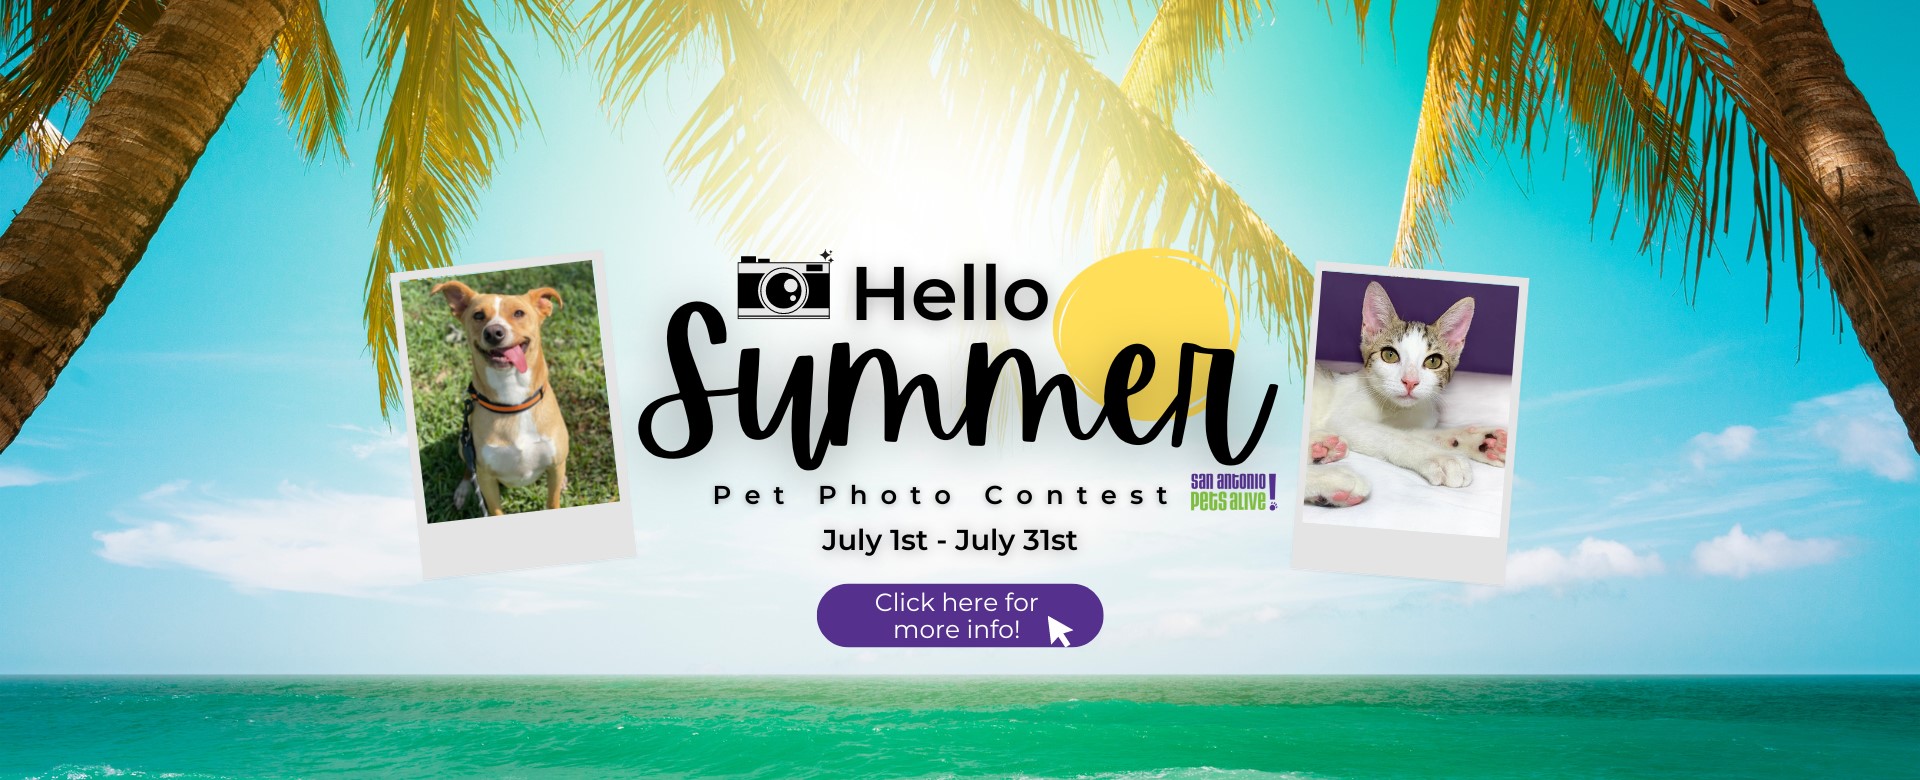 Hello Summer - Pet Photo Contest - July 1st thru July 31st - click to enter